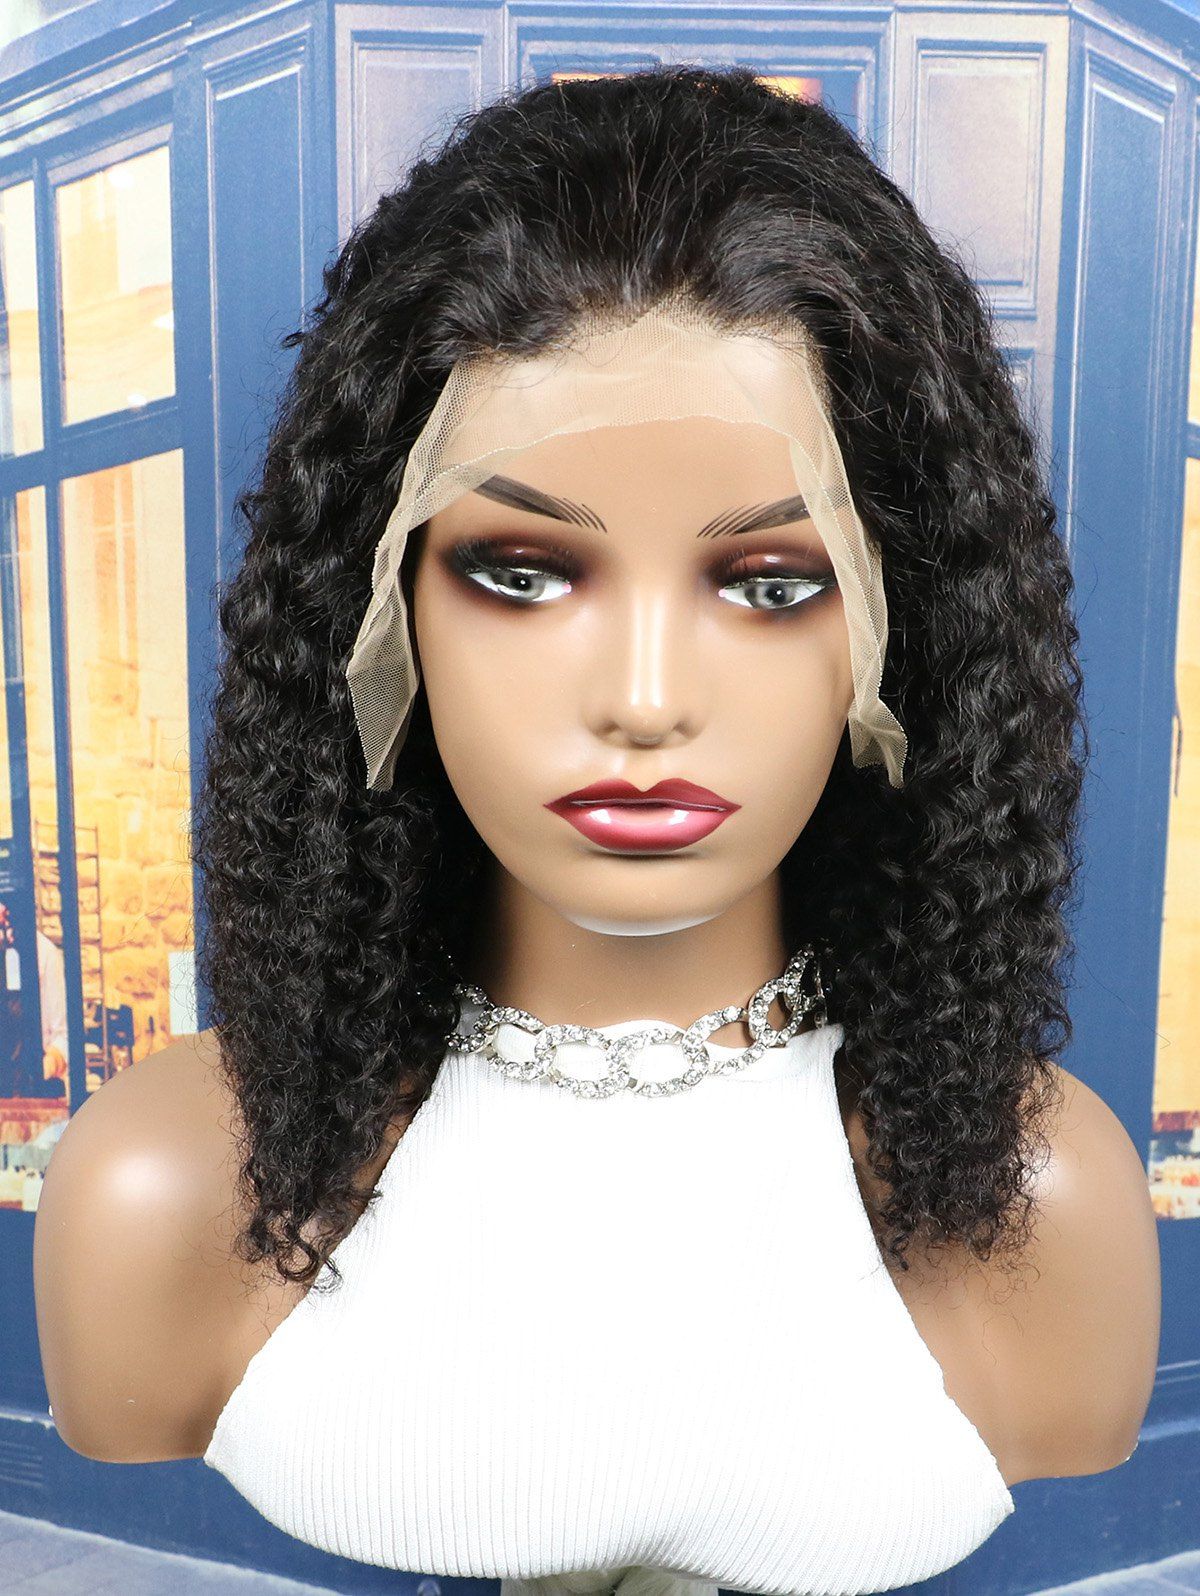 13*4 Lace Front 130% Curly Solid Color Human Hair Wig - BLACK 14INCH